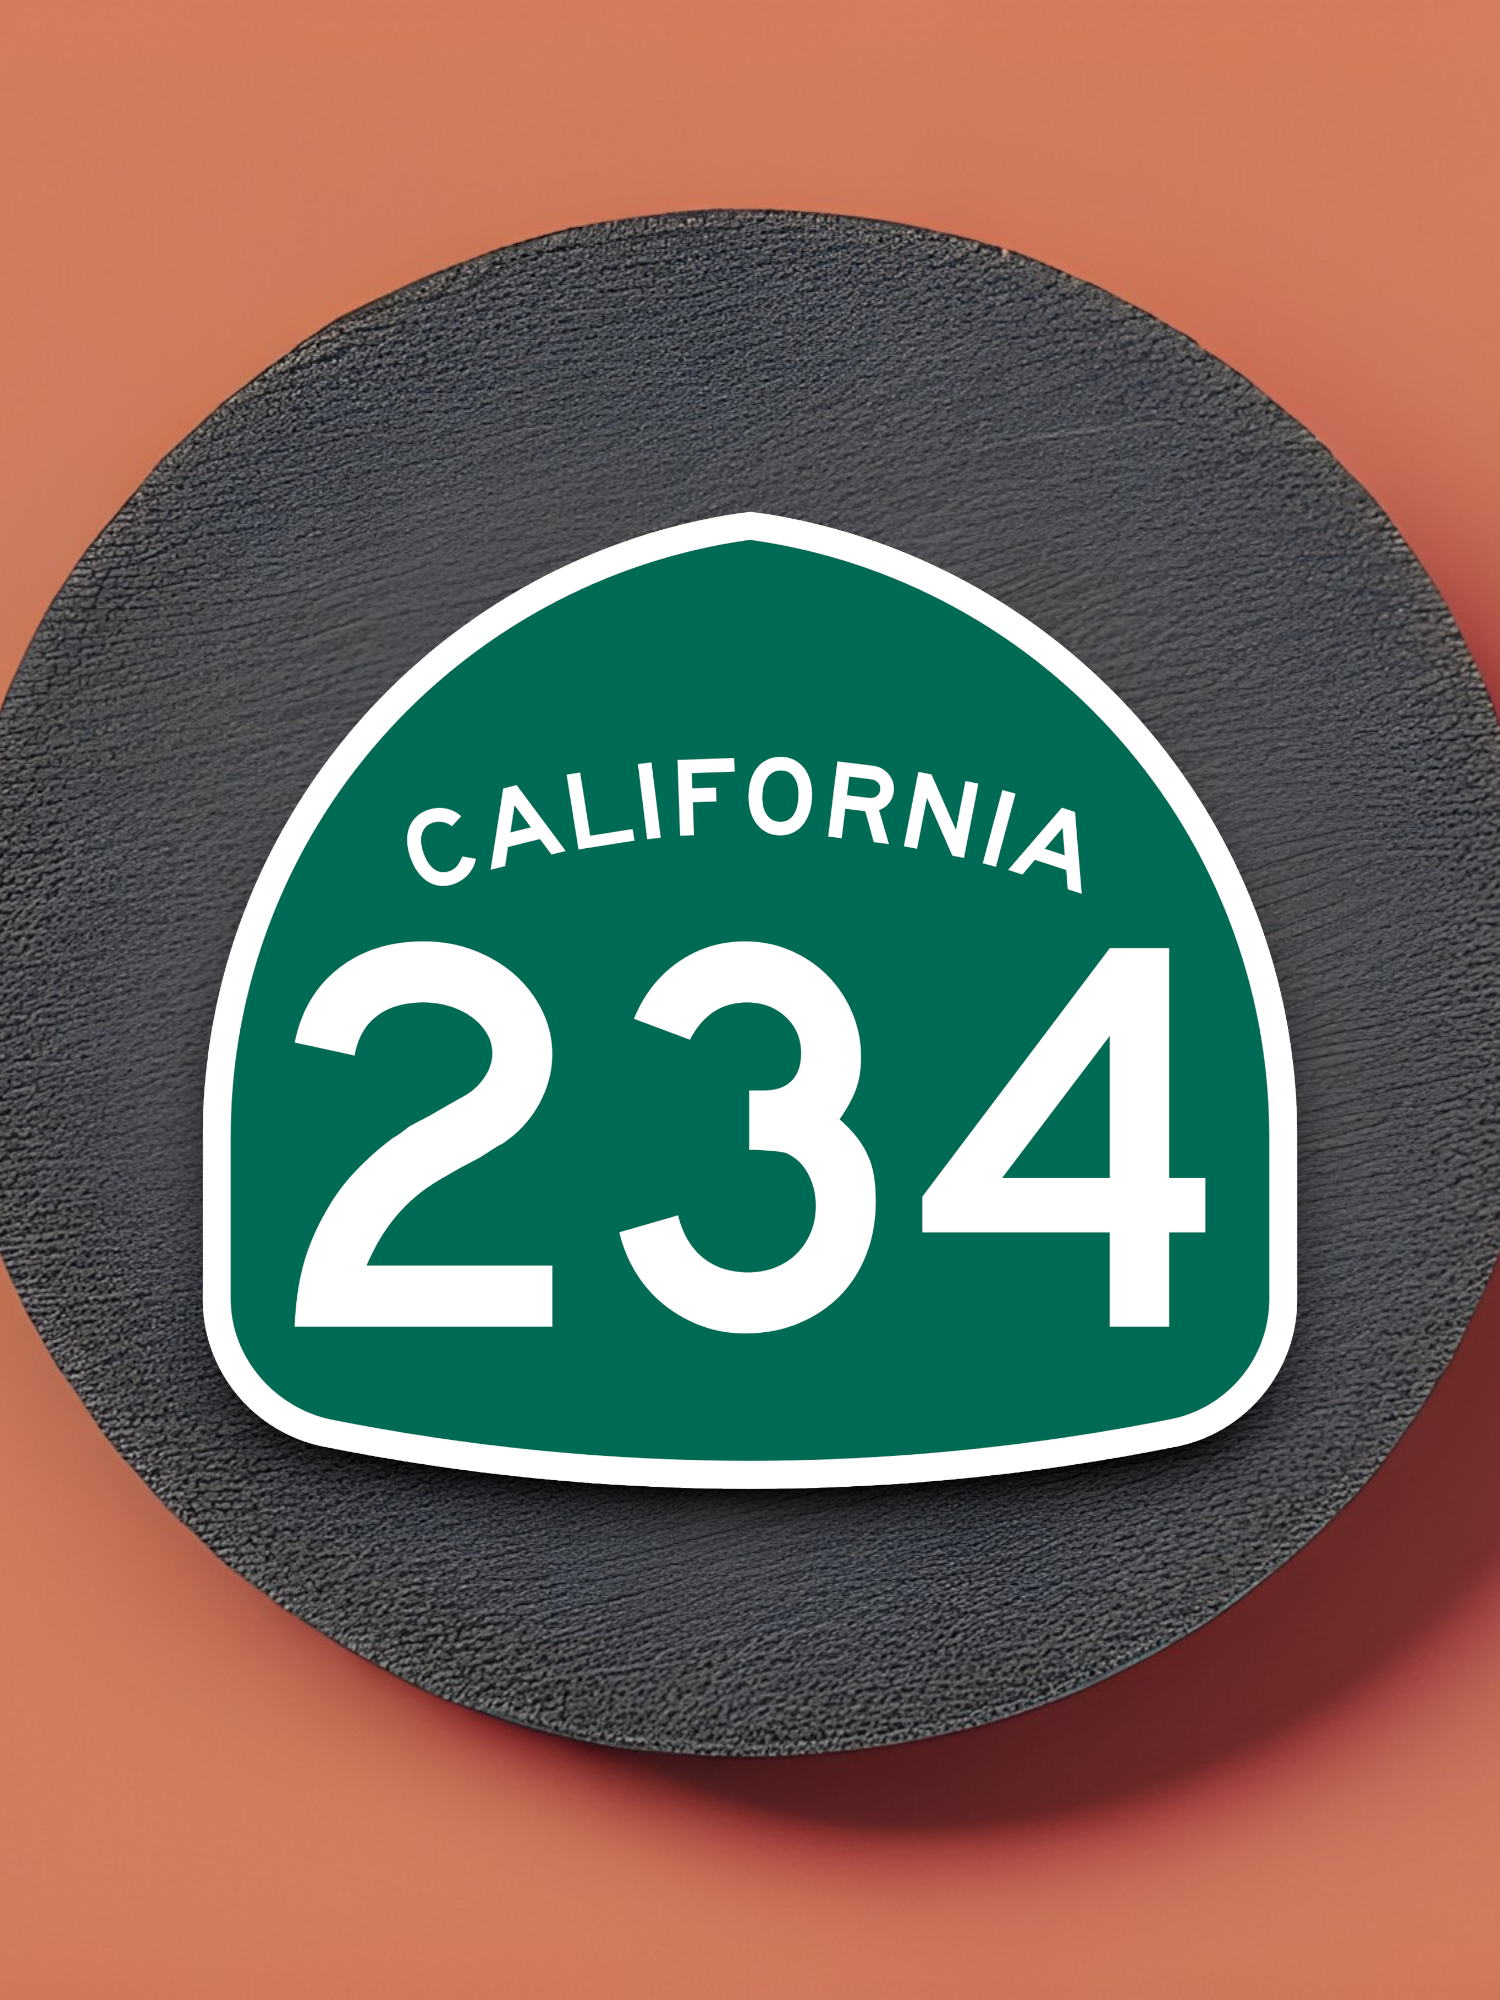 California State Route 234 Road Sign Sticker